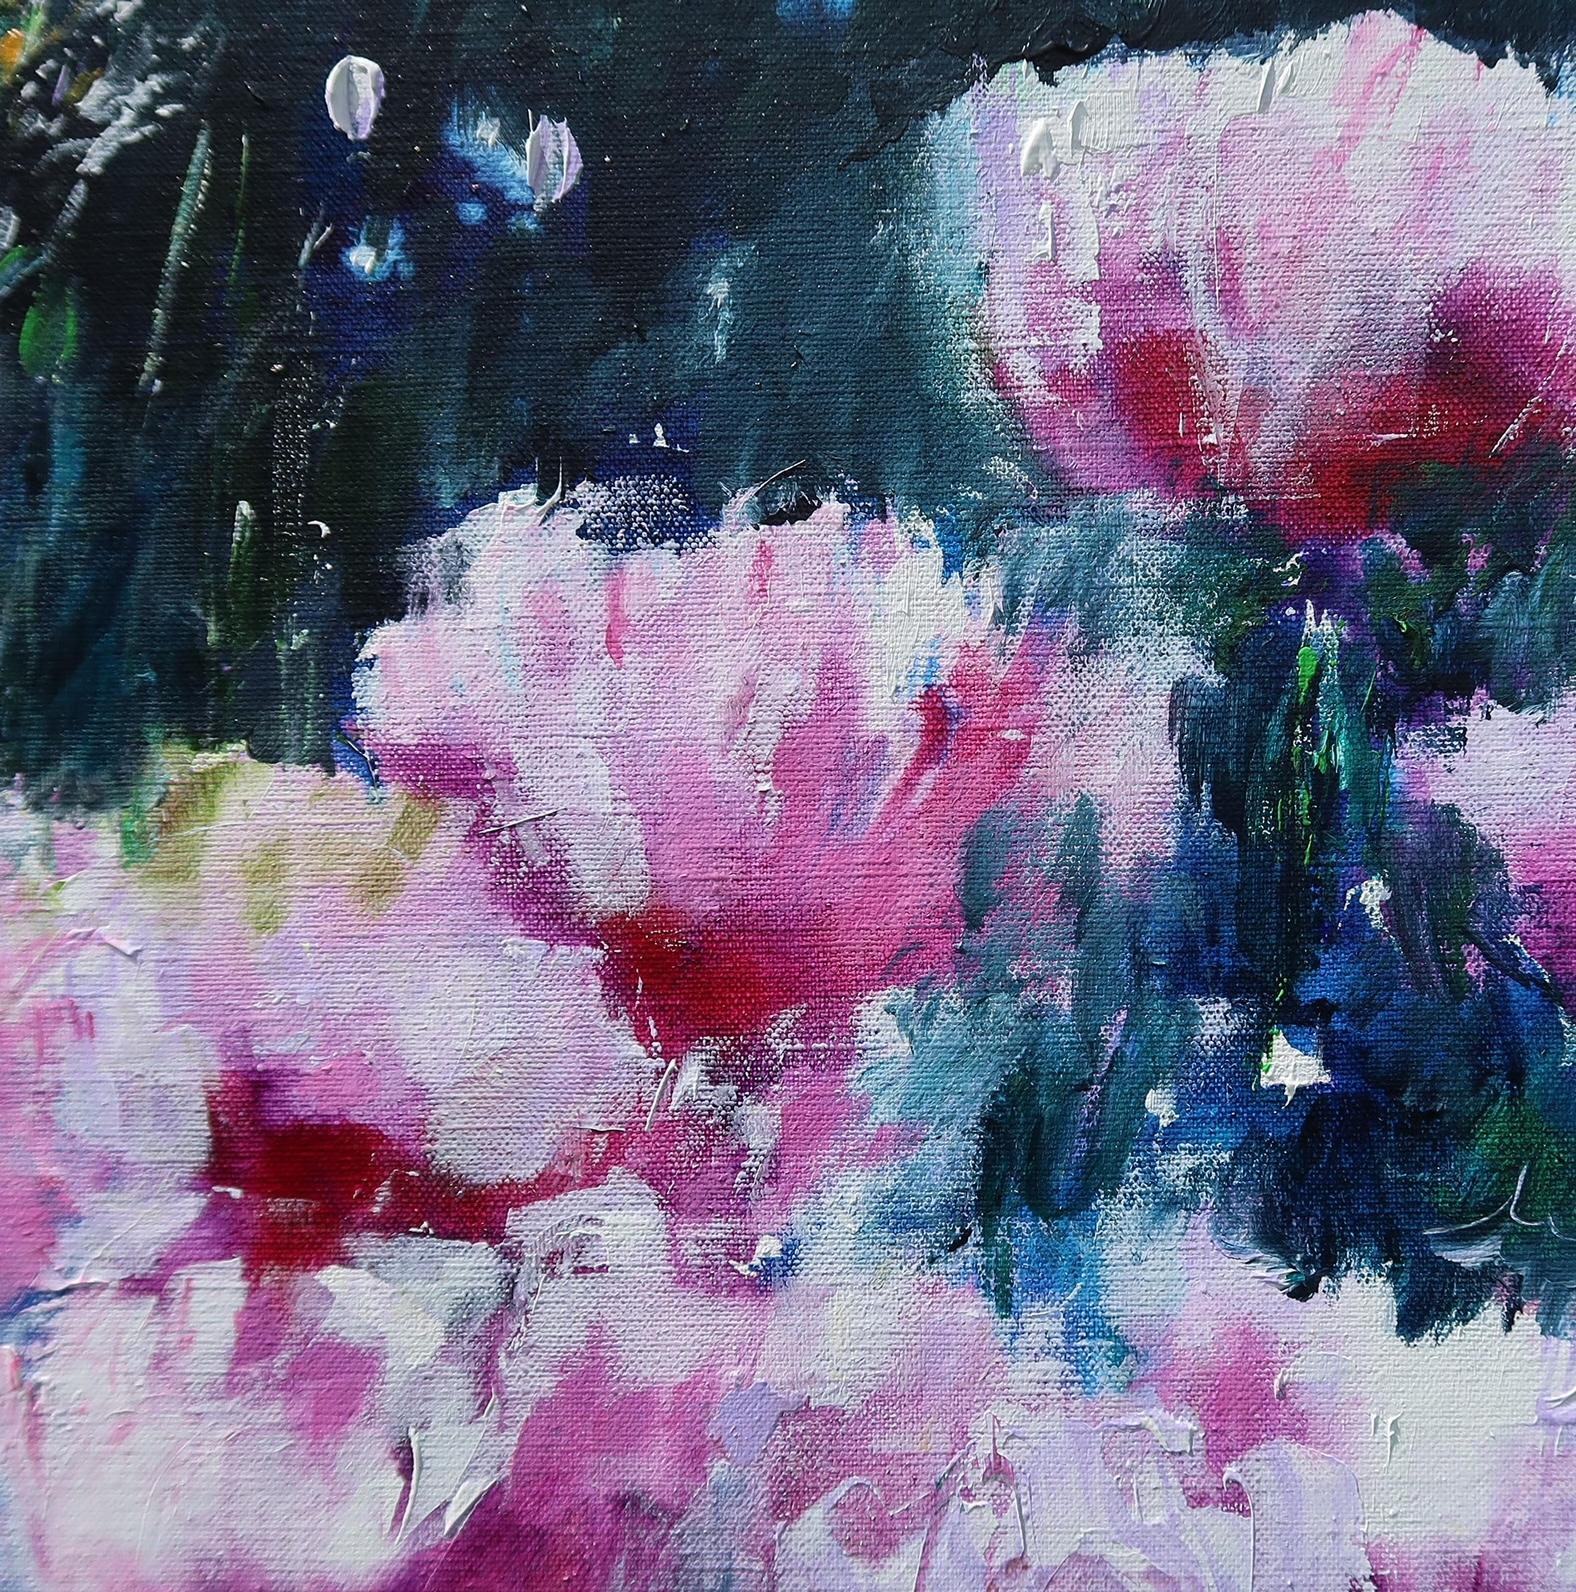 Pink poppies [2023]
Original acrylic on canvas
Image size: H:73 cm x W:60 cm
Complete Size of Unframed Work: H:73 cm x W:60 cm x D:2cm
Sold Unframed
Please note that insitu images are purely an indication of how a piece may look

Pink poppies